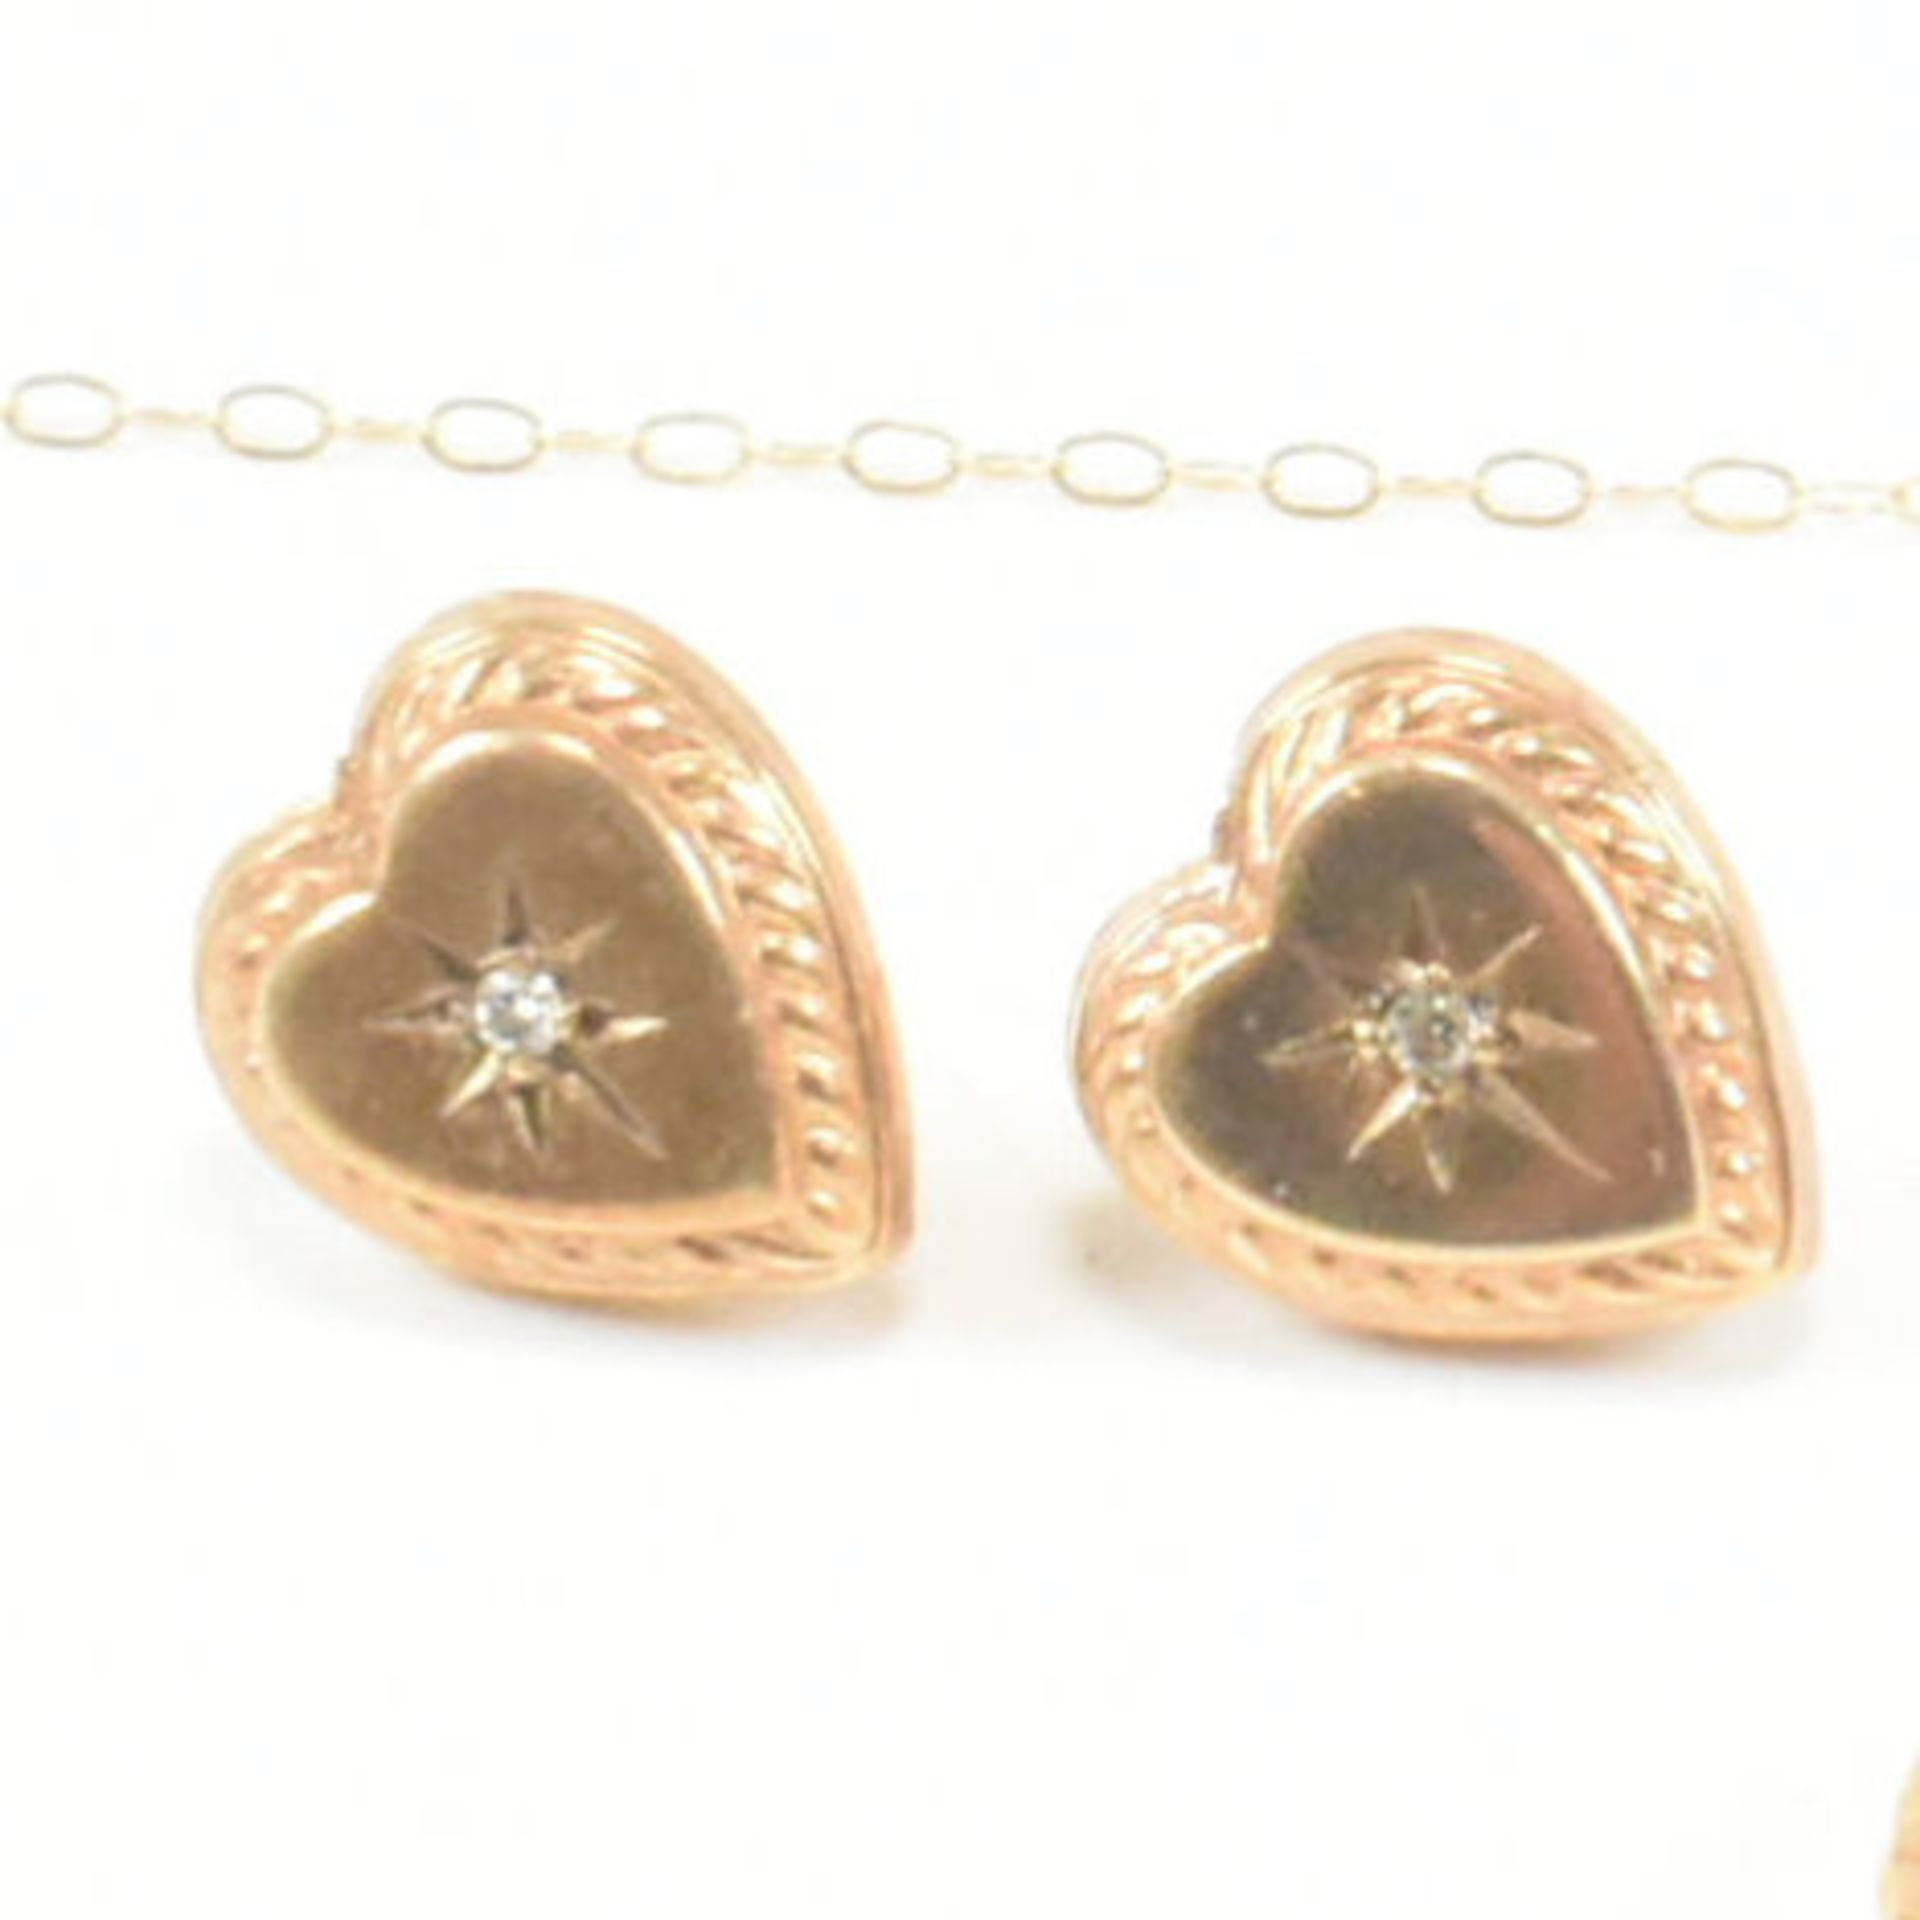 FOUR PAIRS OF 9CT GOLD EARRINGS & A 9CT GOLD PENDANT NECKLACE - Image 4 of 8